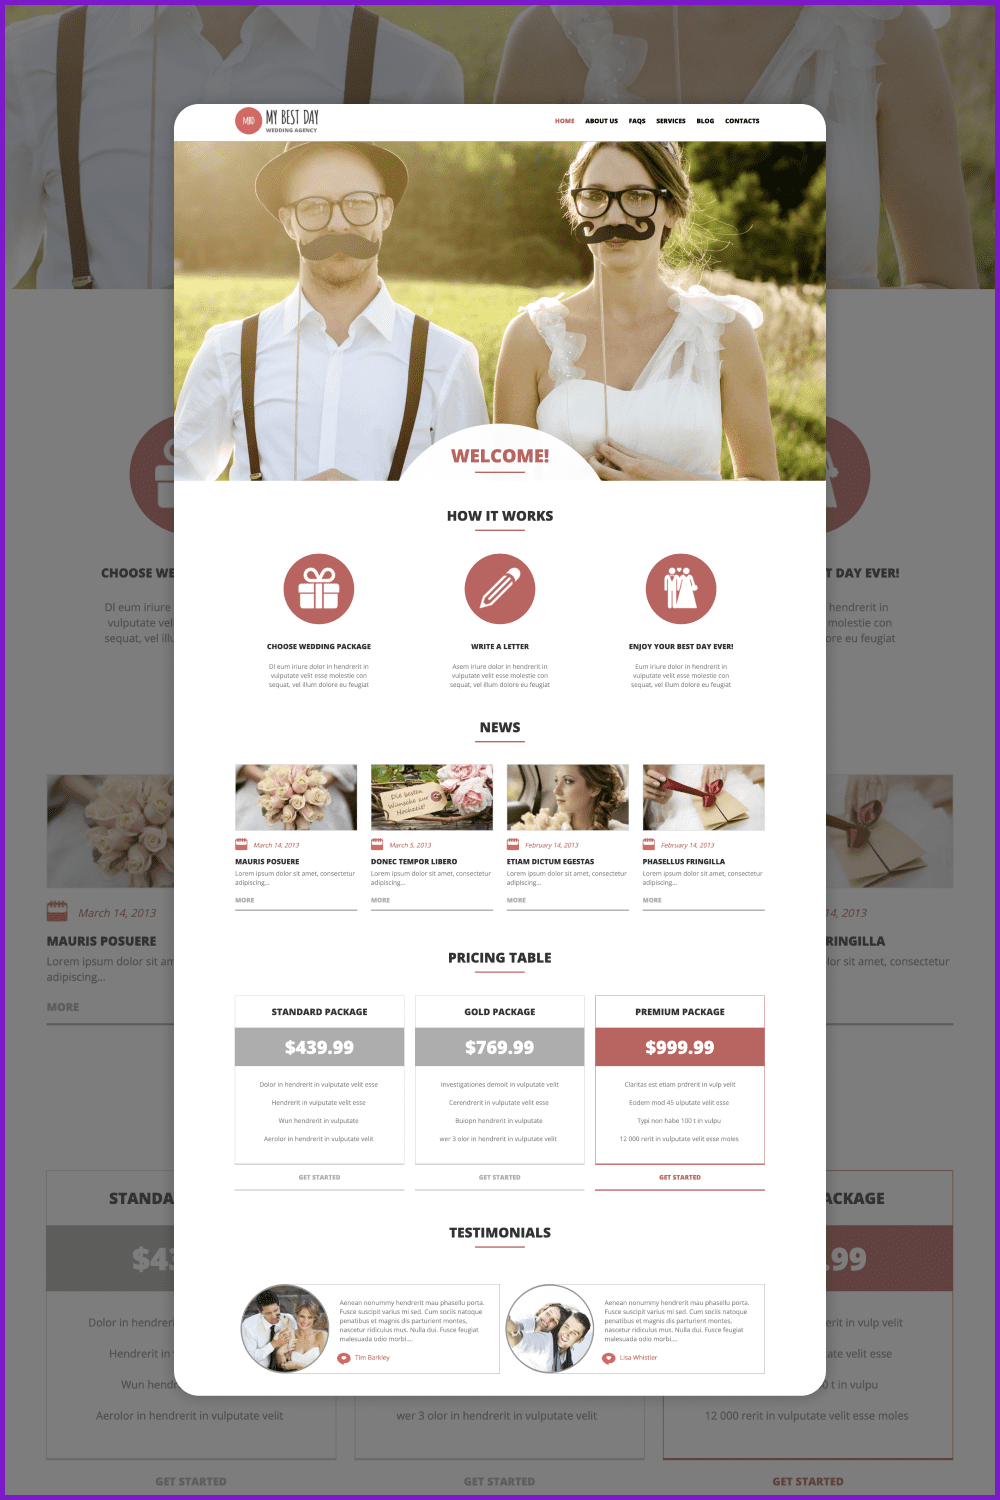 Screenshot of wedding planner website homepage with pricing table and news.